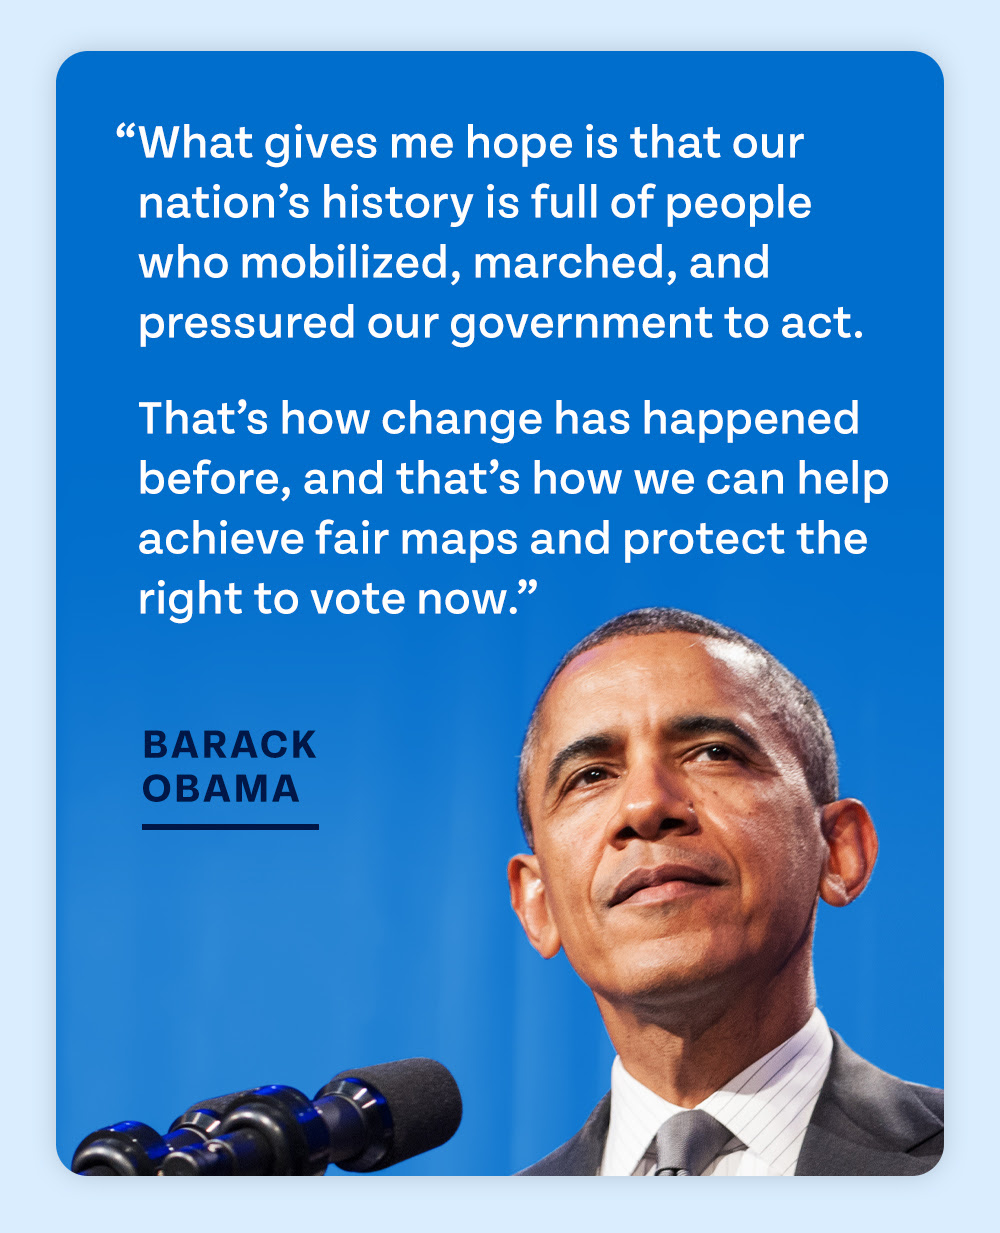 Recent quote from President Obama